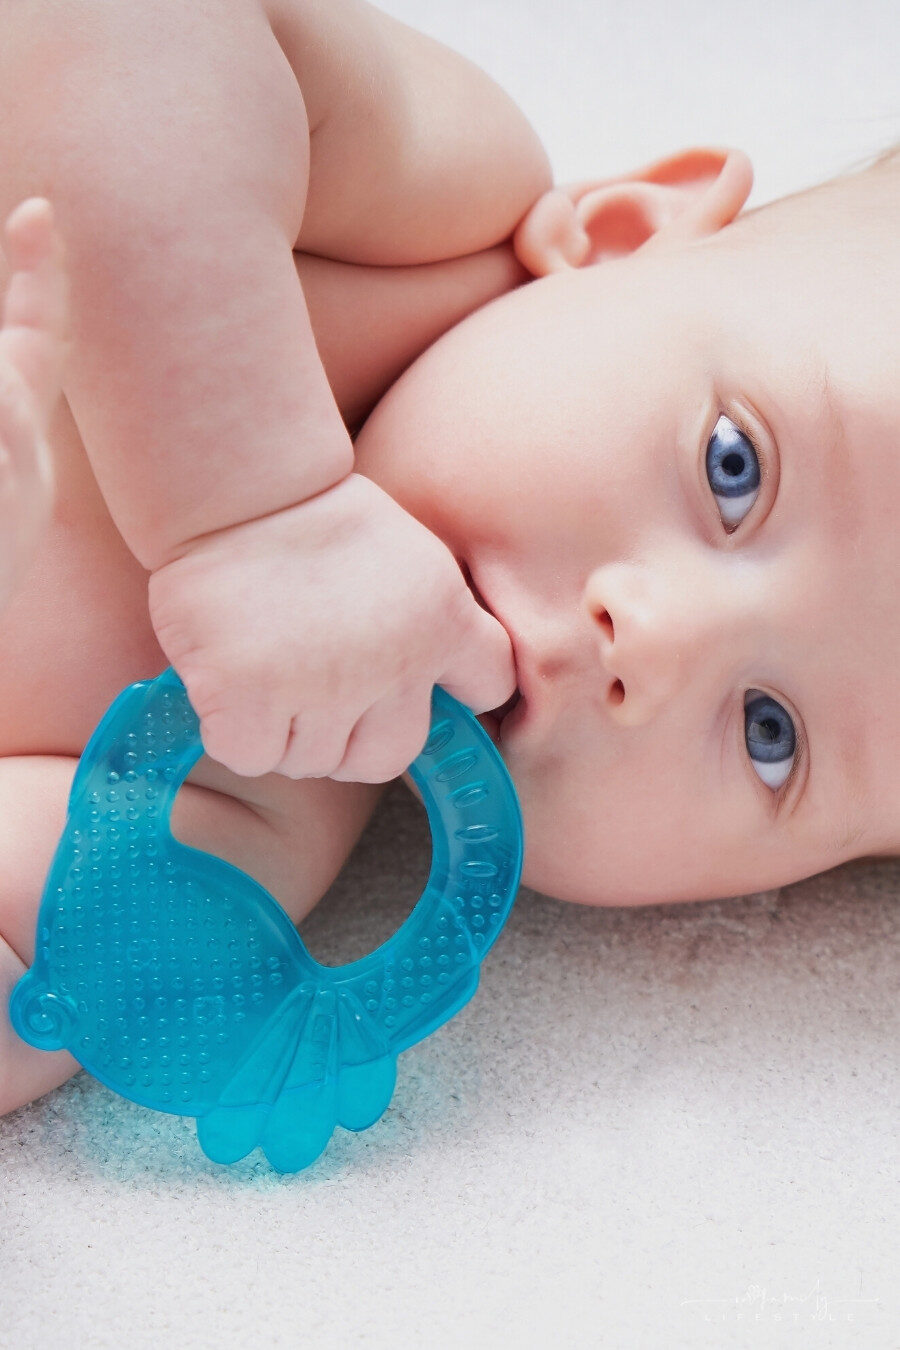 Baby Teething Five Ways to Ease Pain and Discomfort